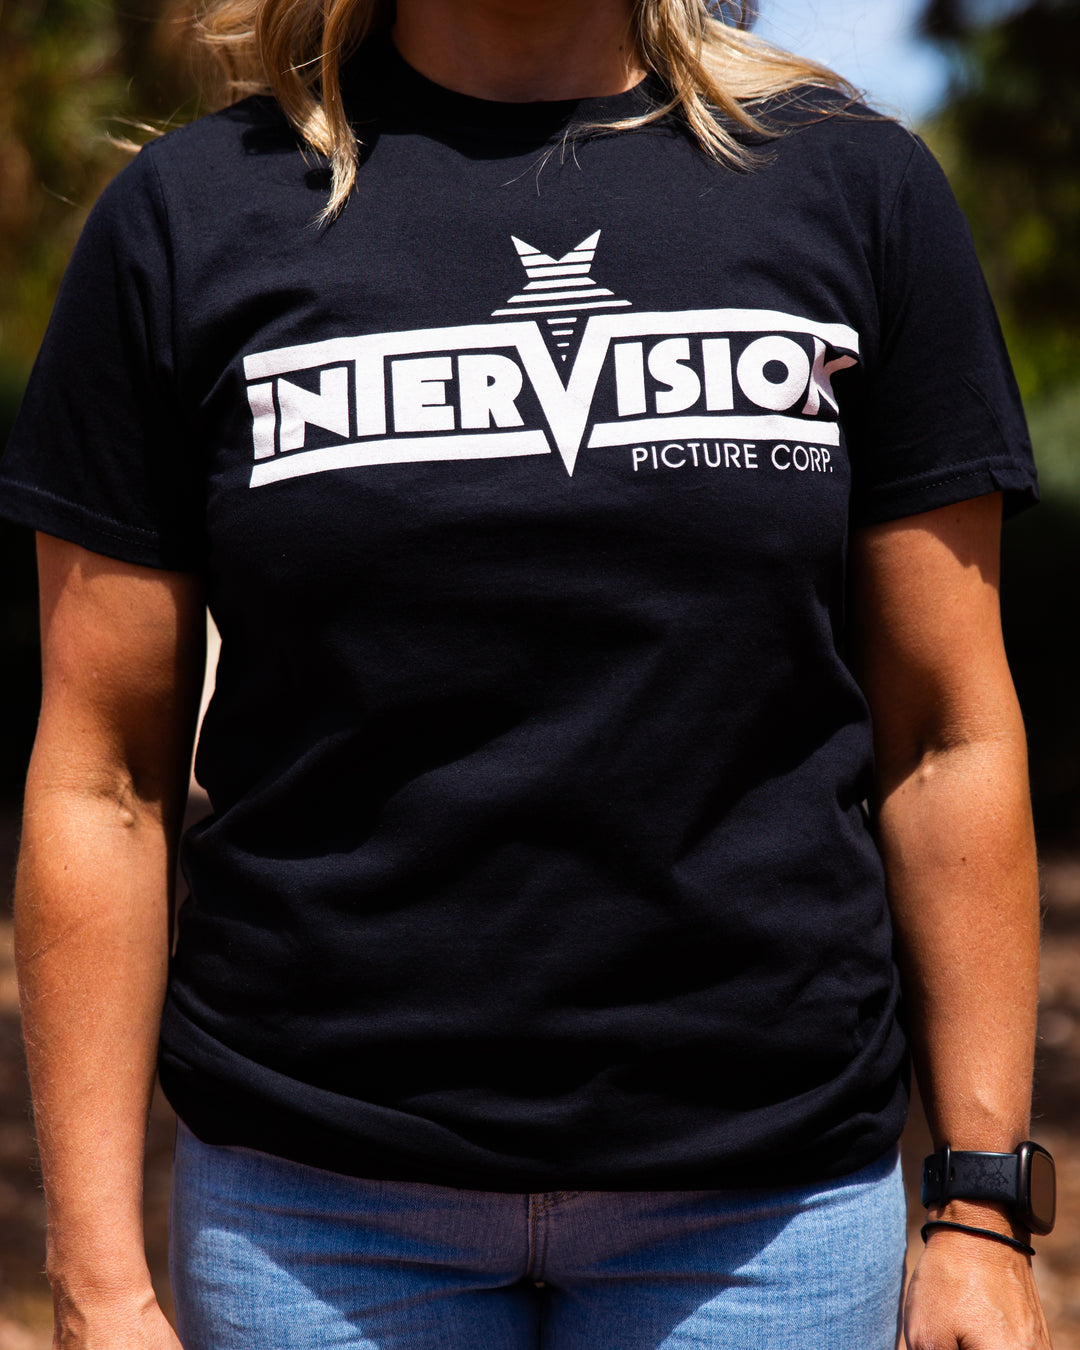 Intervision Picture Corp. [T-Shirt]